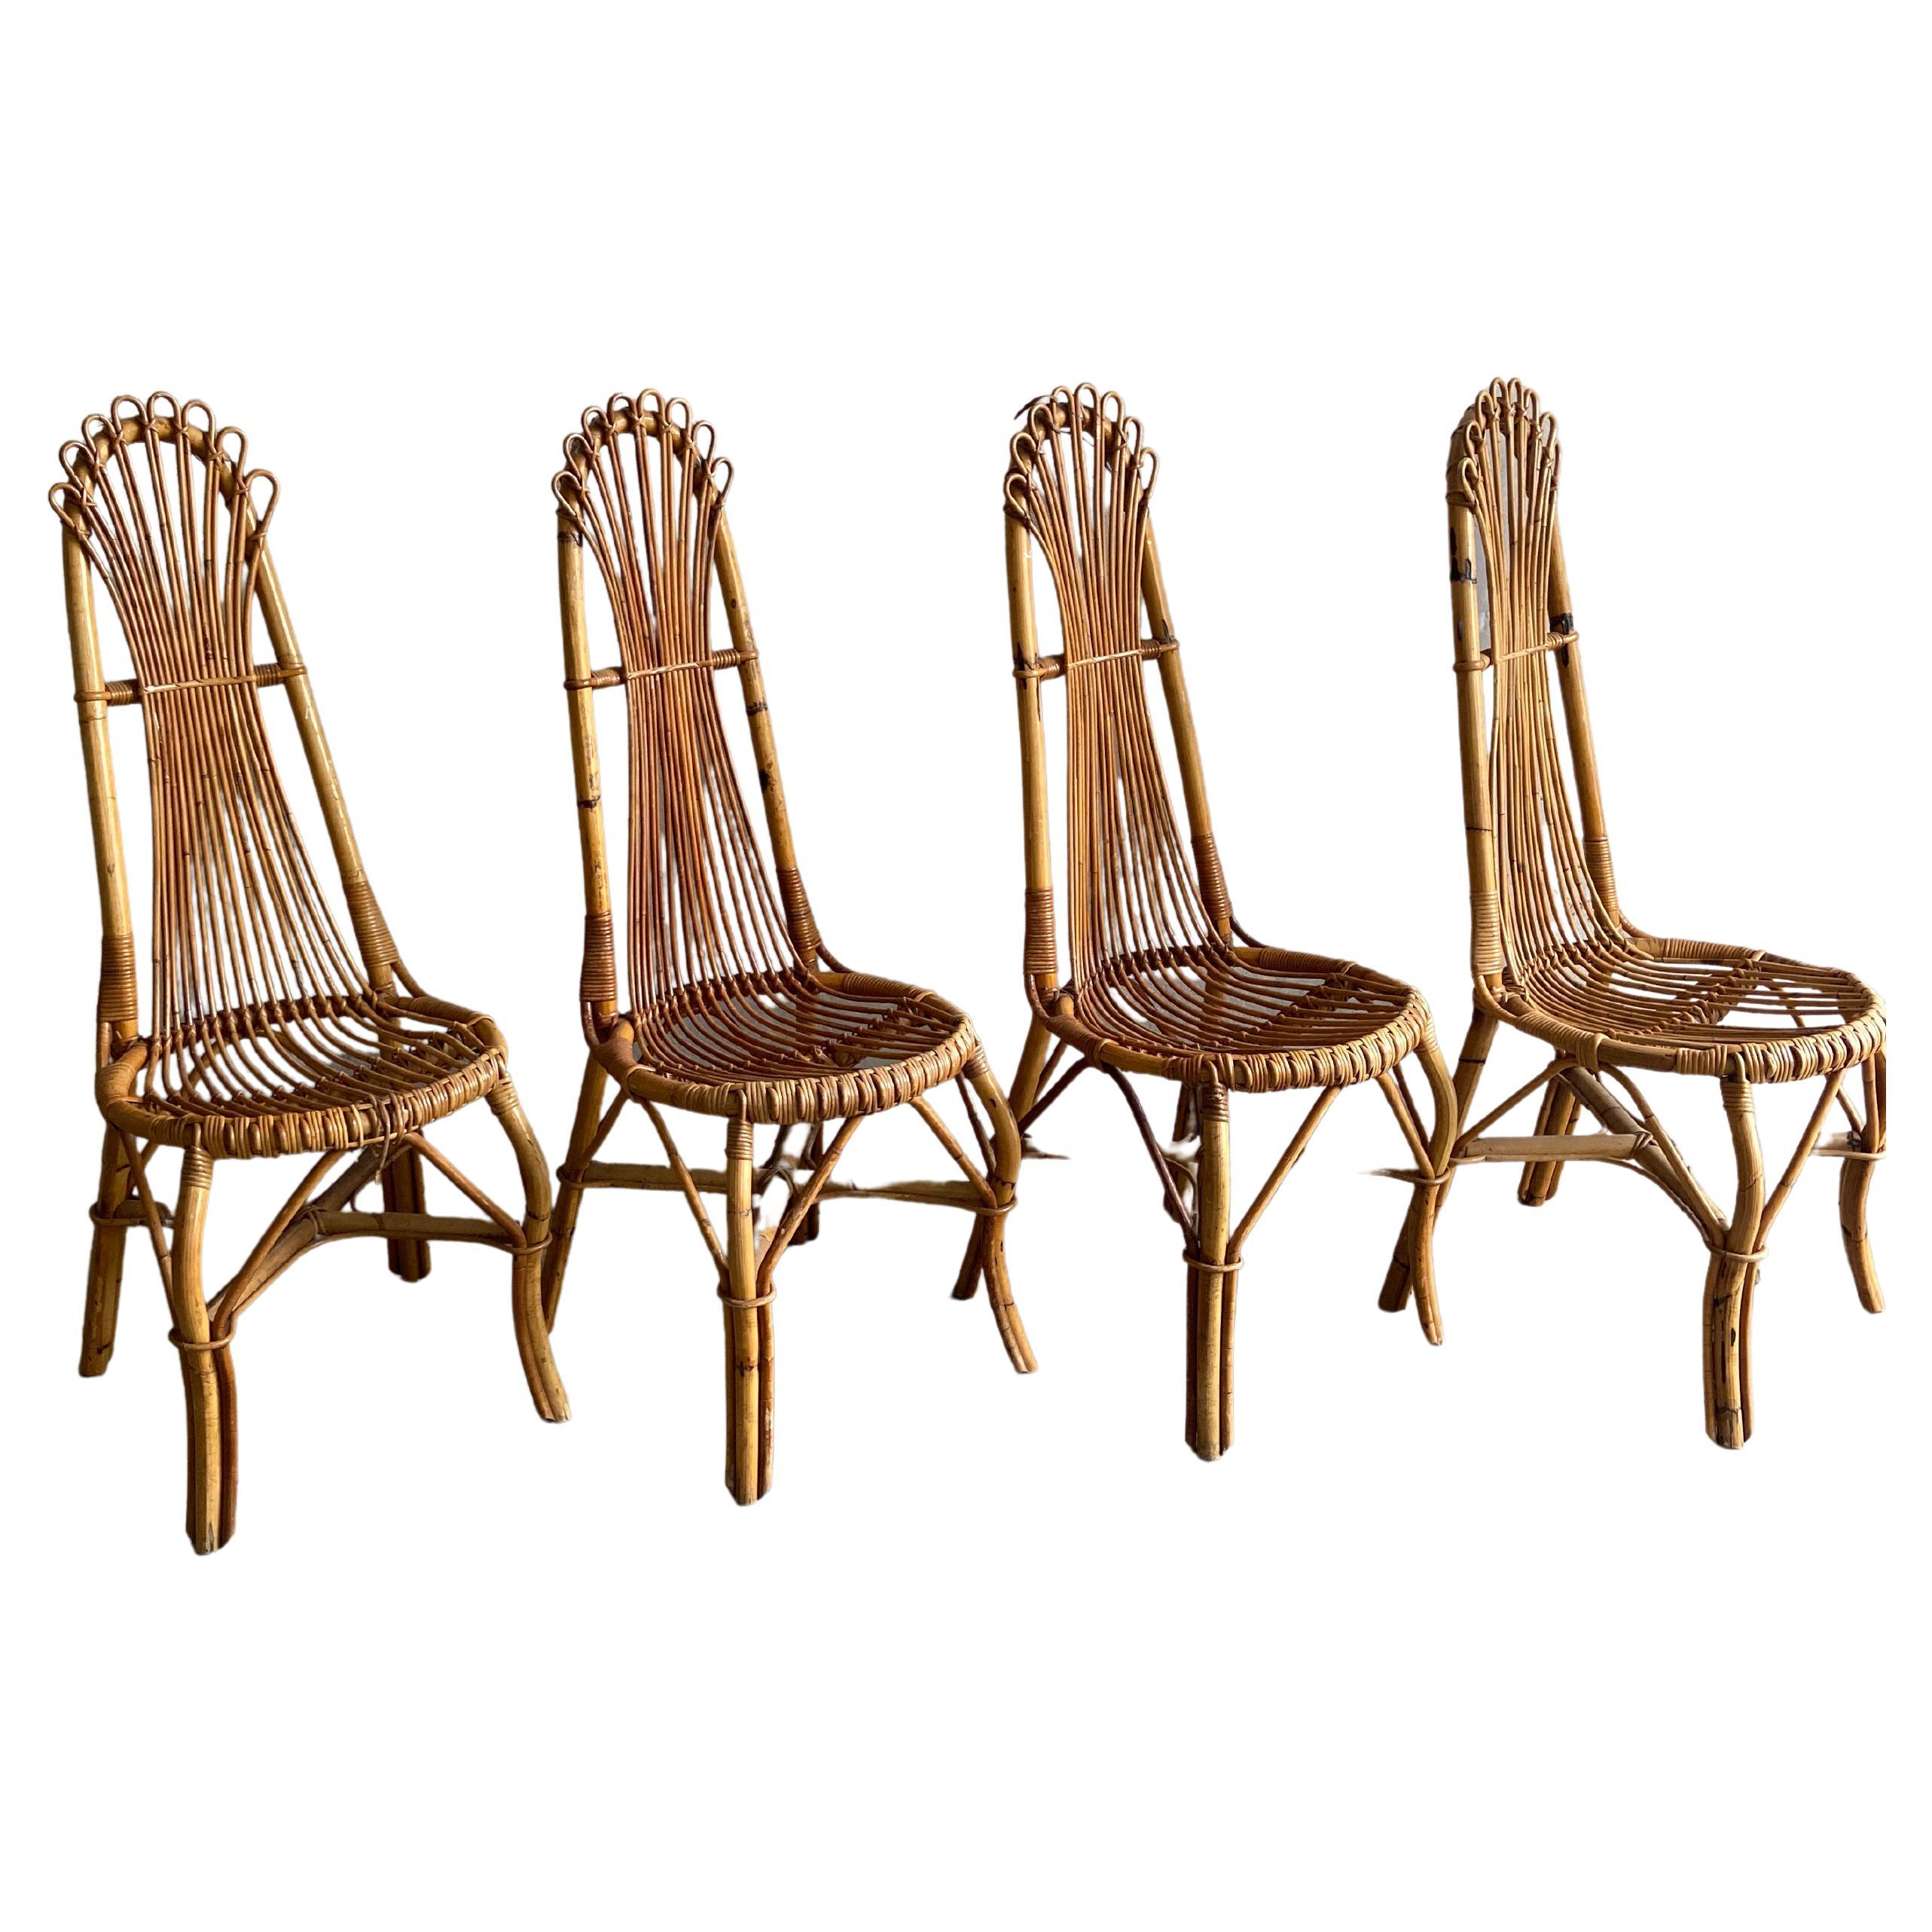 Mid-Century Modern French Set of 4 Bamboo and Rattan Dining Chairs, 1960s